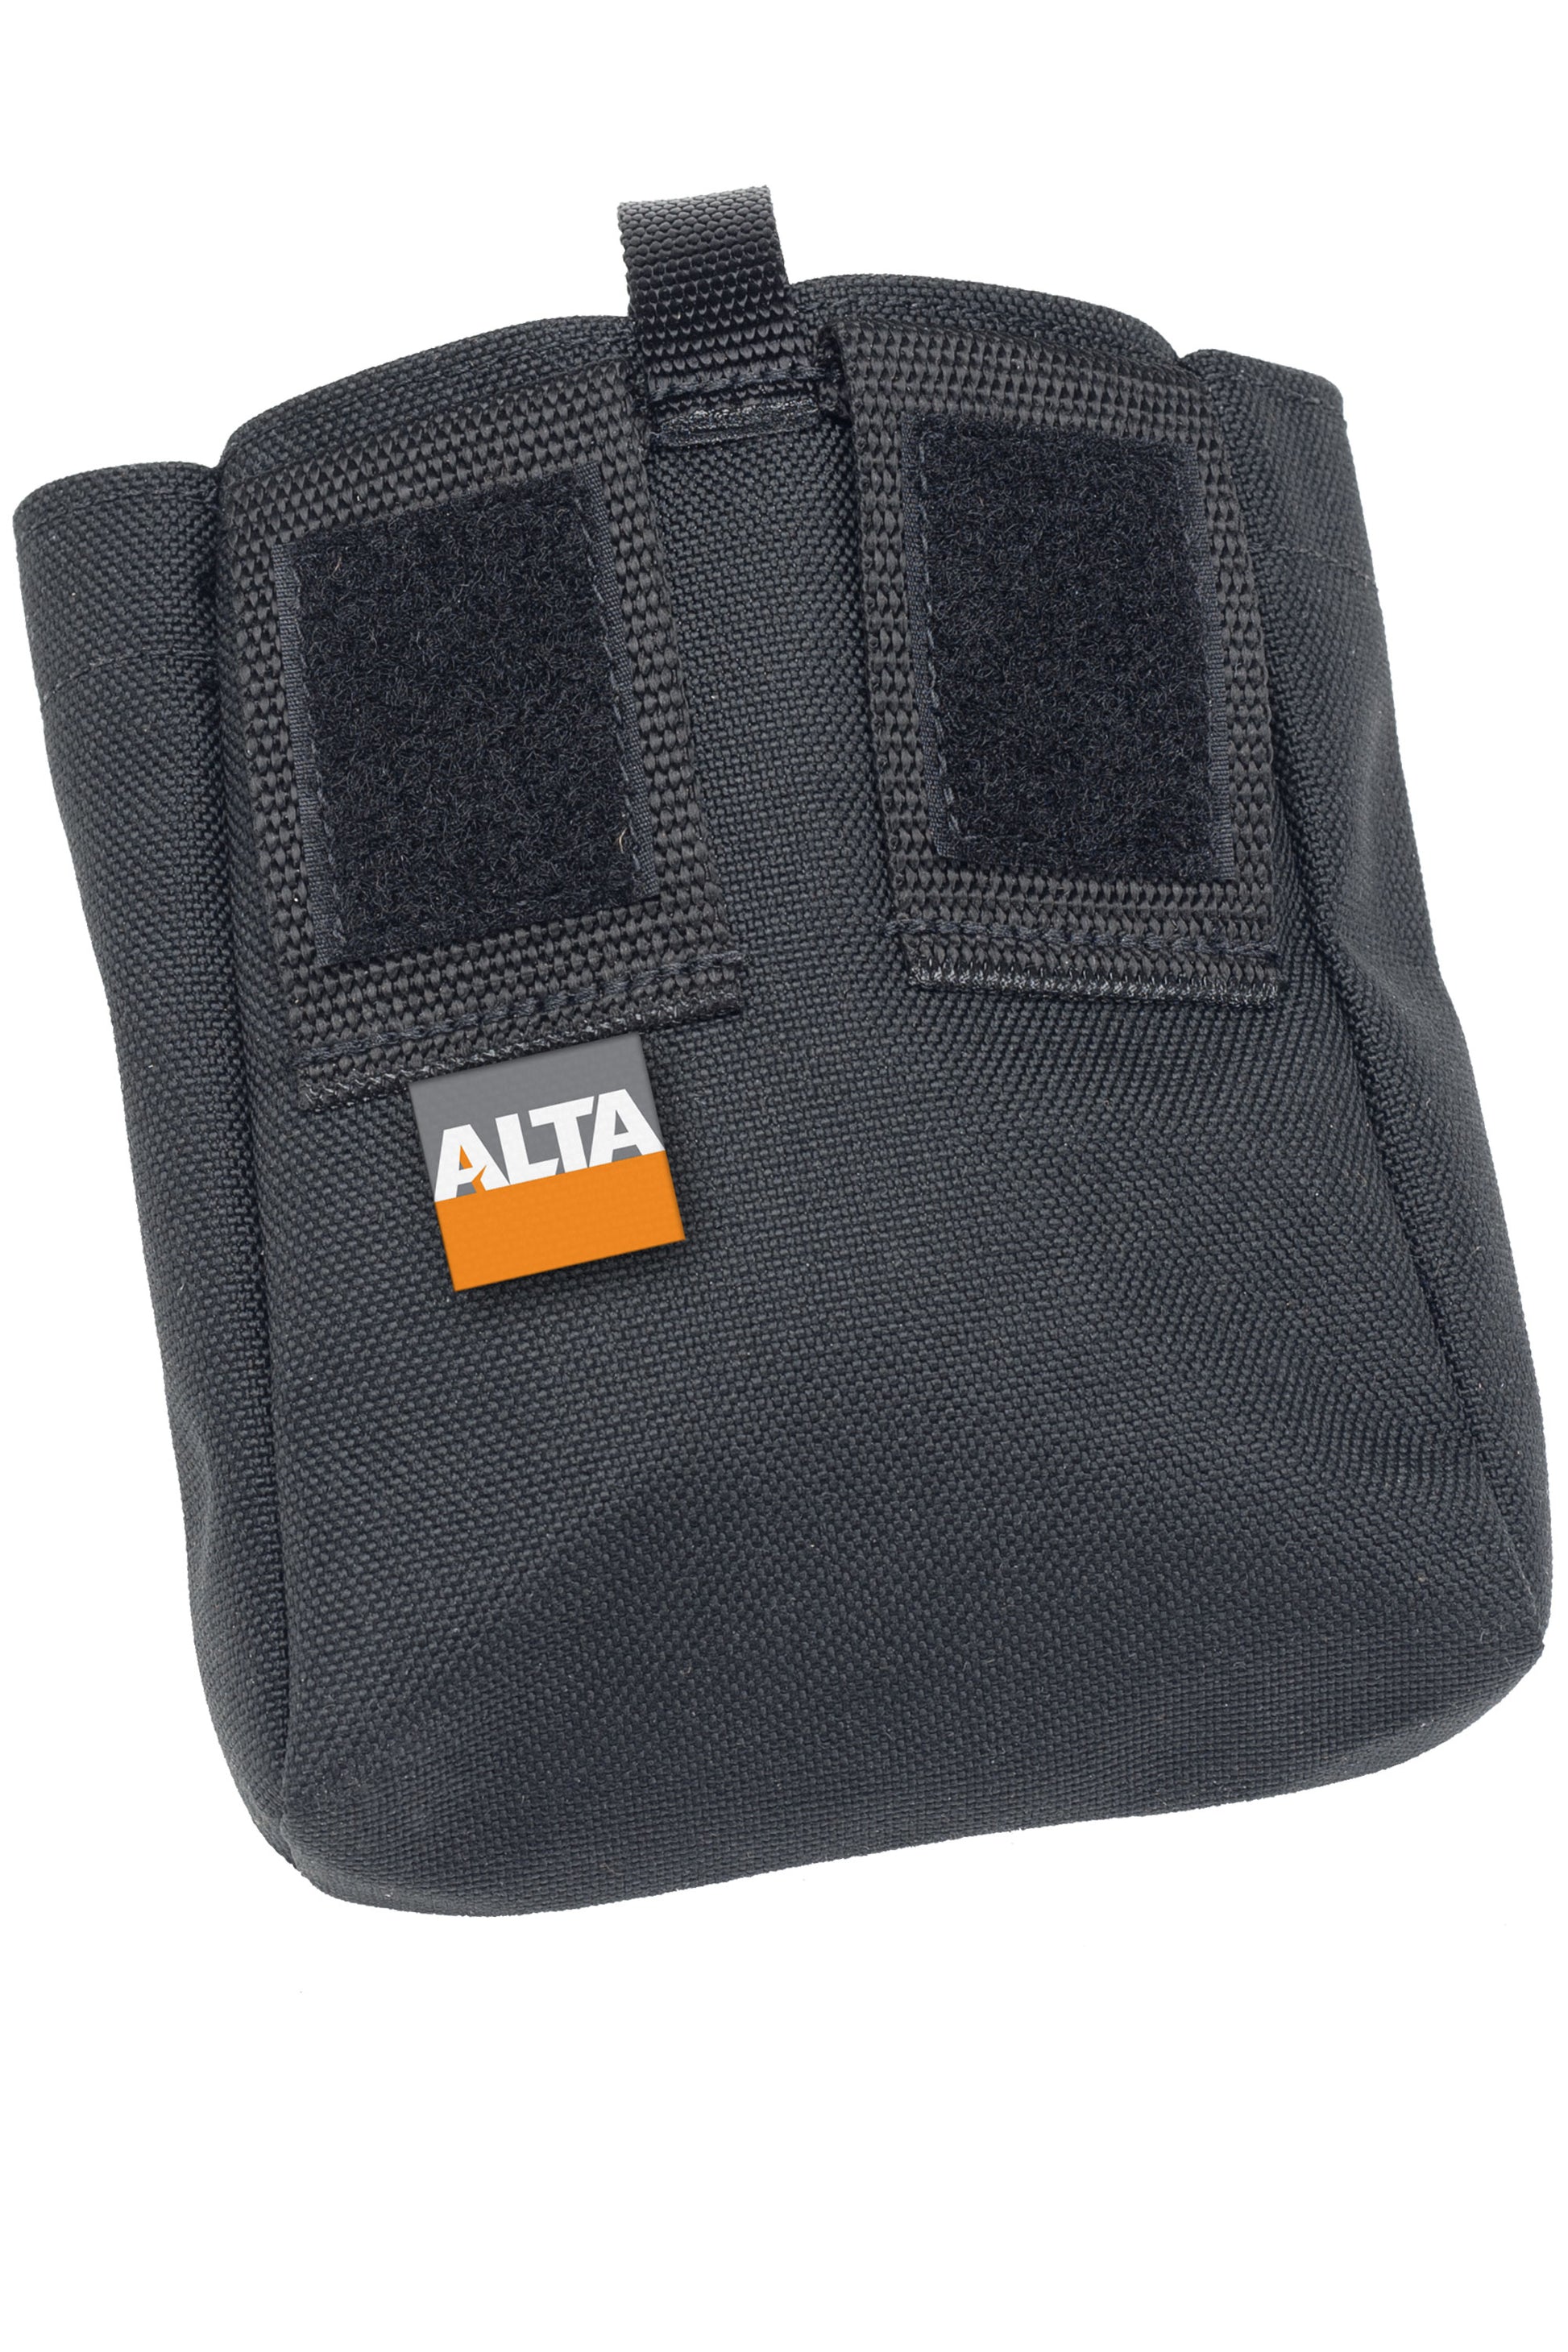 AltaGEAR Gadget Pouch with Belt Loops